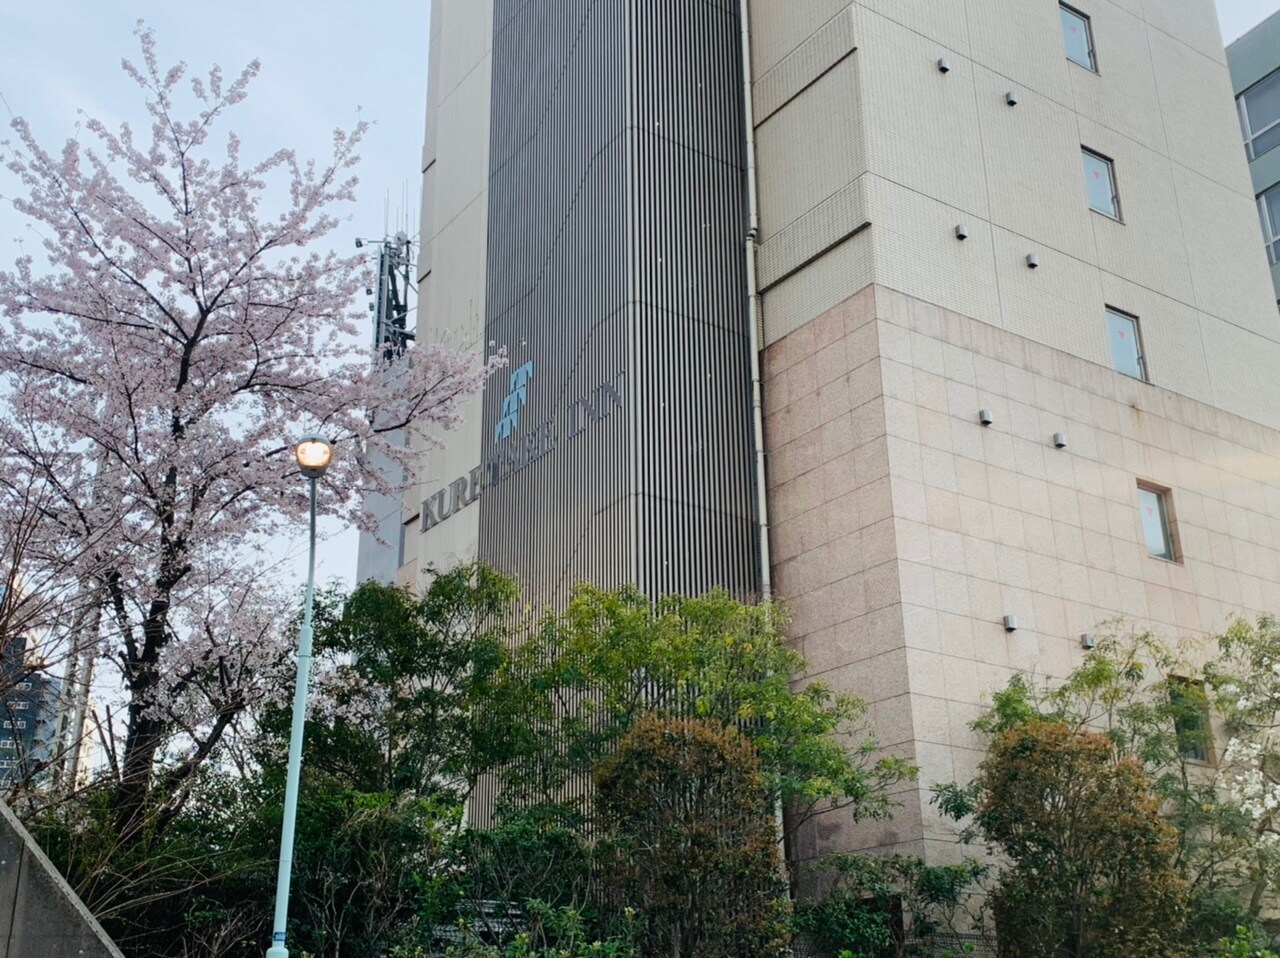 Appearance of the hotel (cherry blossom)